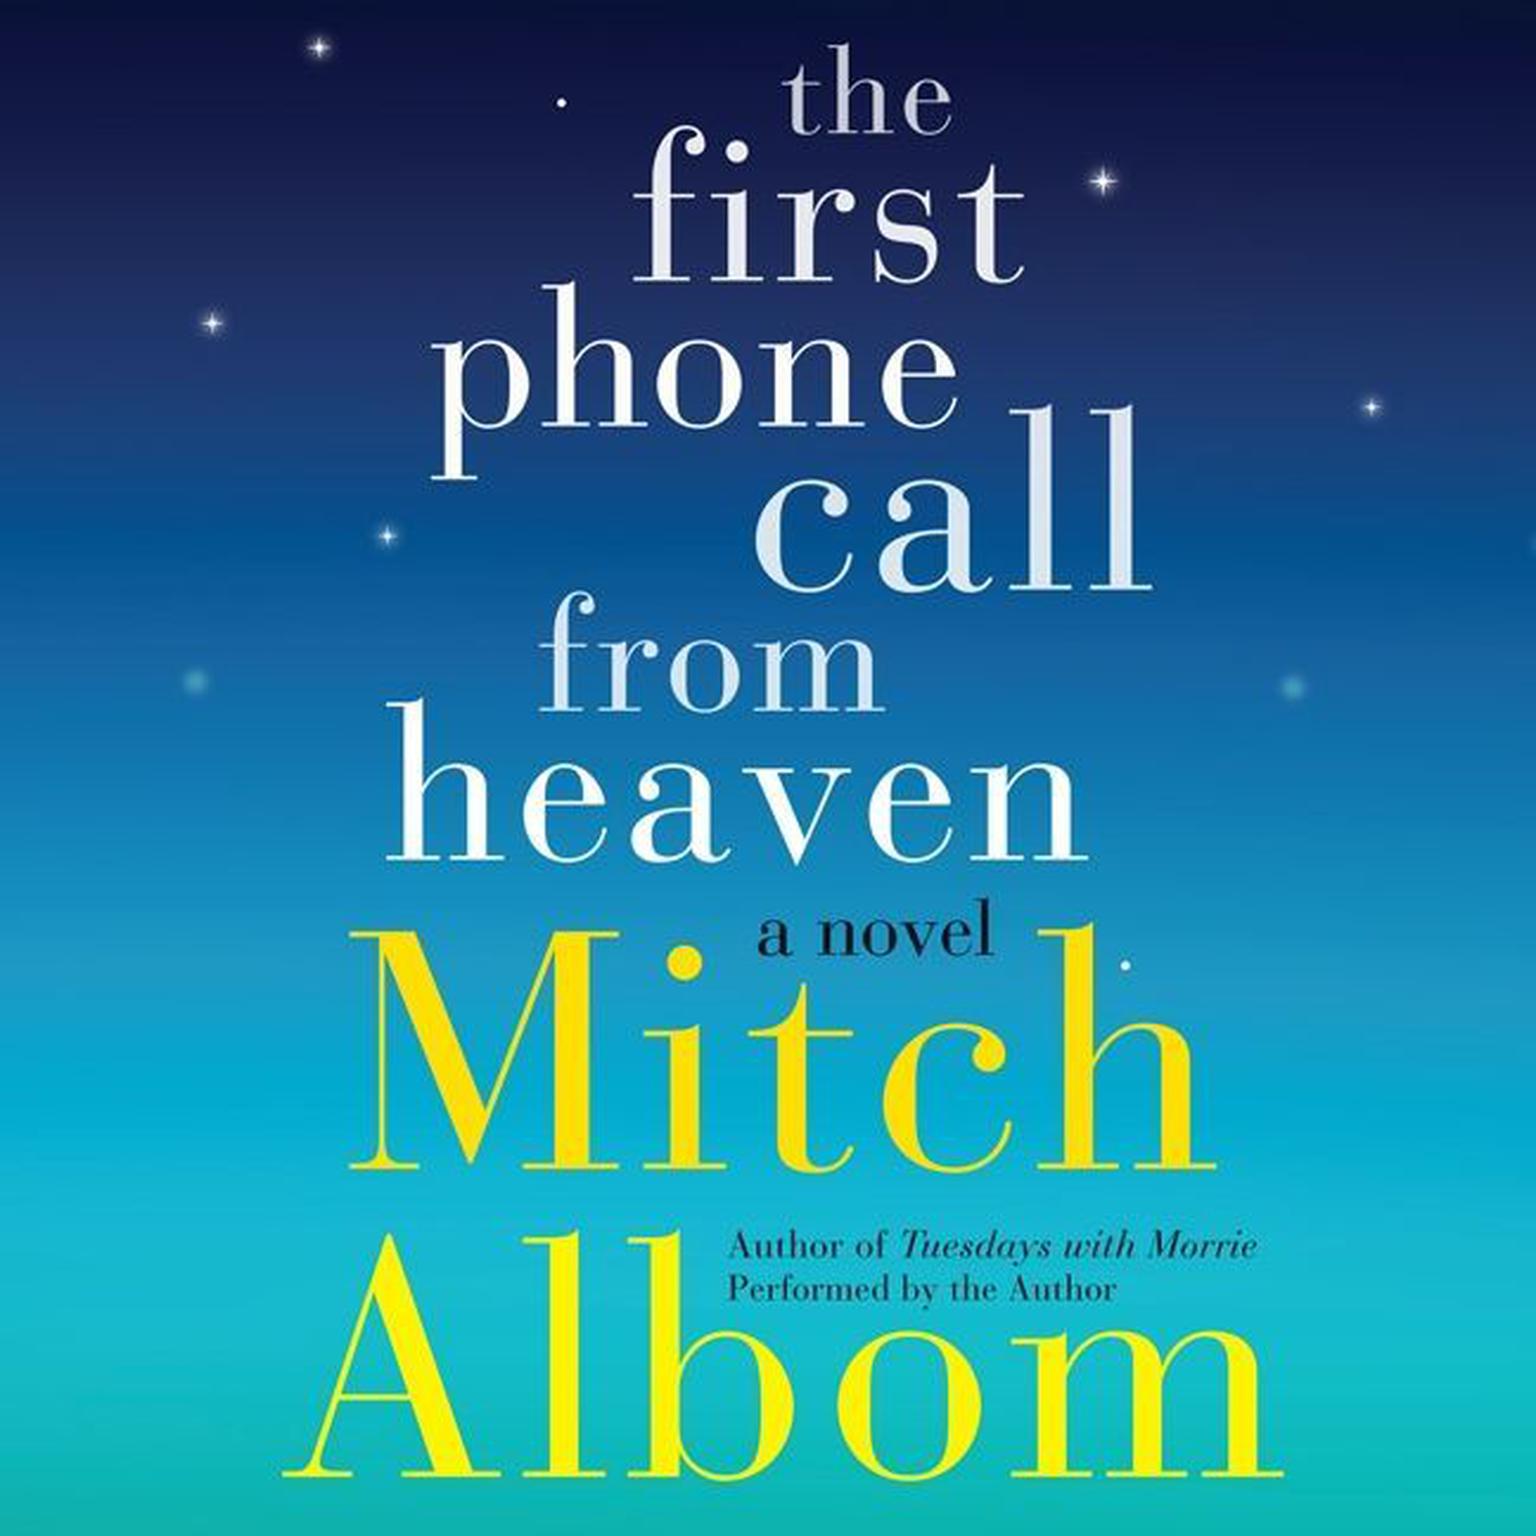 The First Phone Call From Heaven: A Novel Audiobook, by Mitch Albom